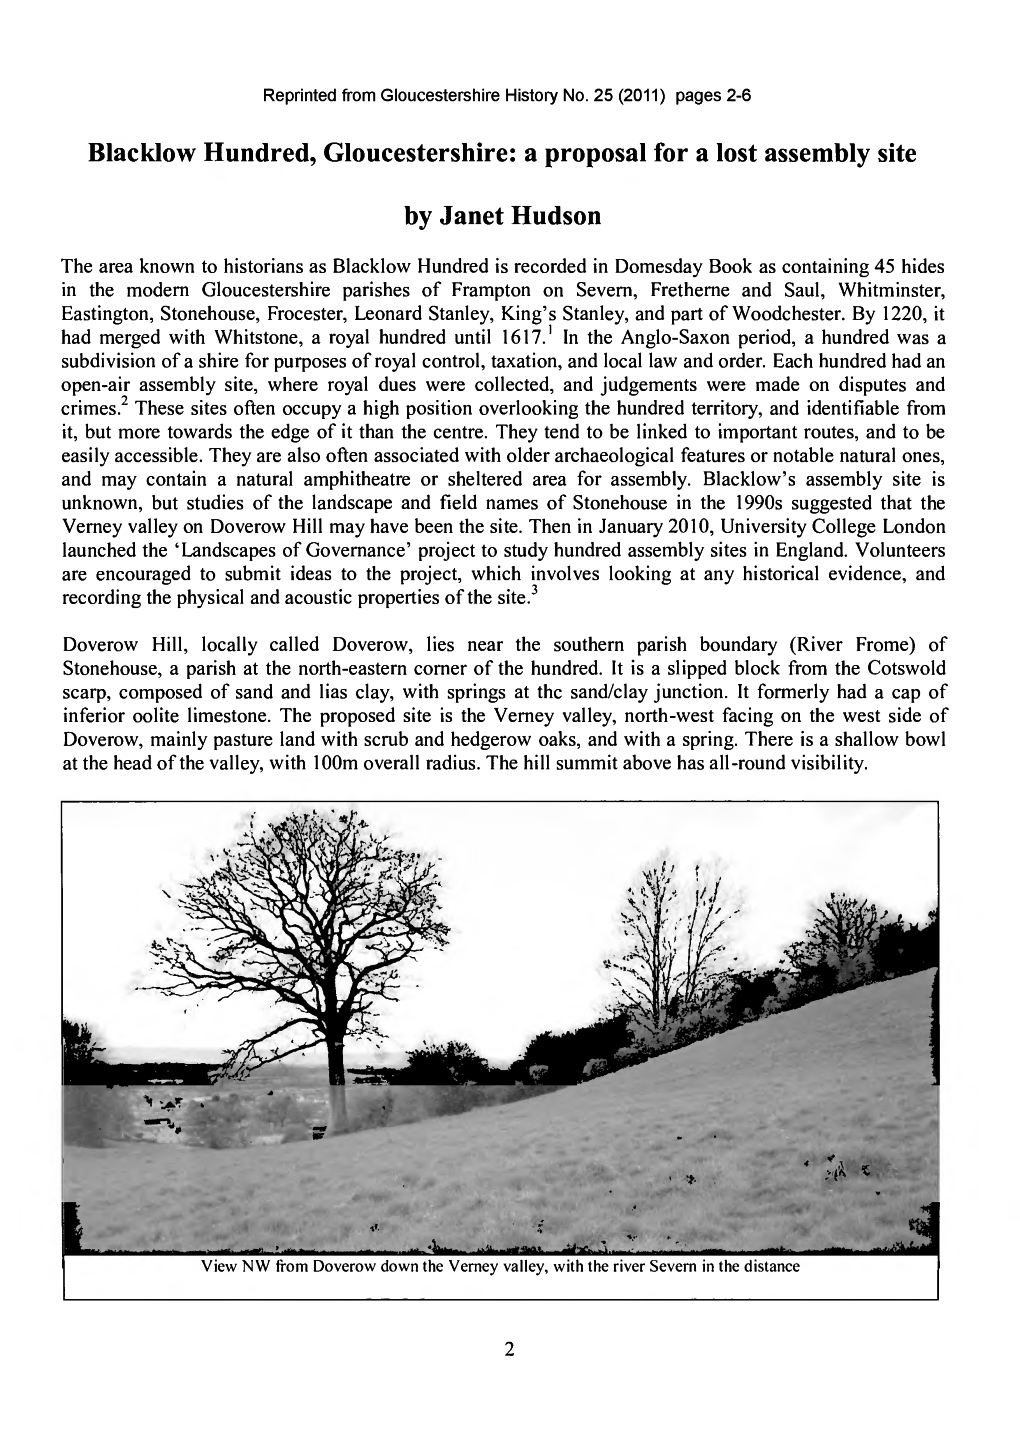 Blacklow Hundred, Gloucestershire: a Proposal for a Lost Assembly Site By